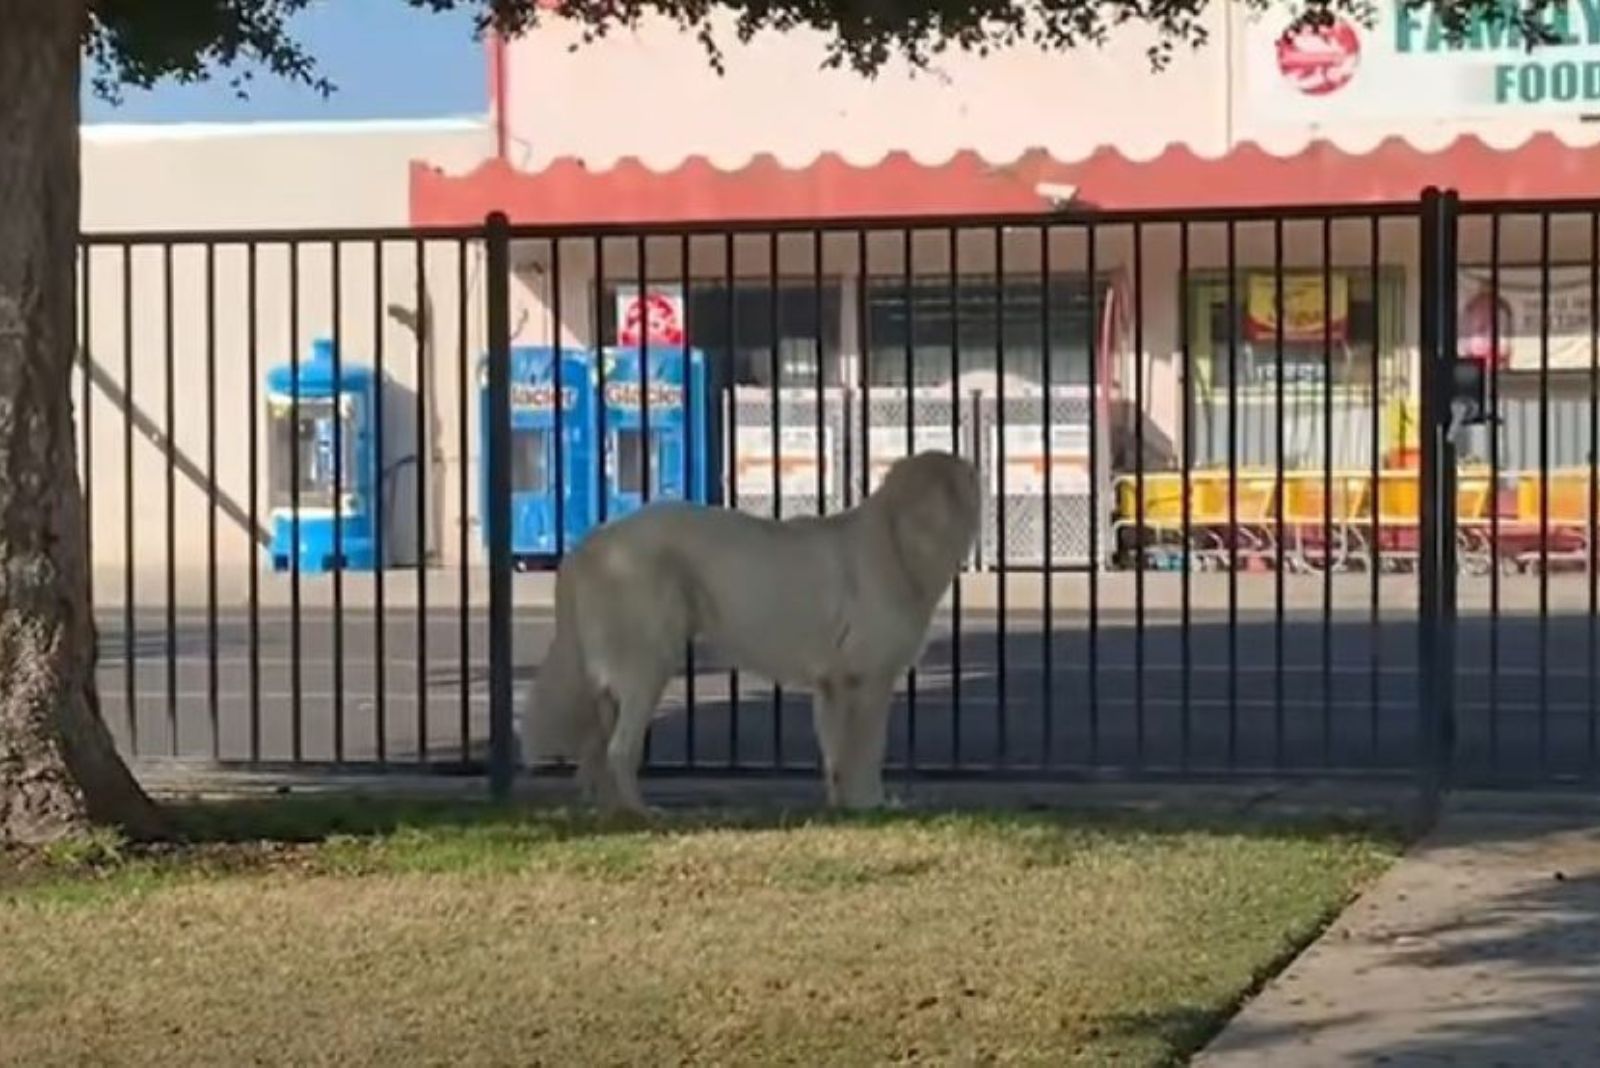 the dog stands behind the fence and looks at the road